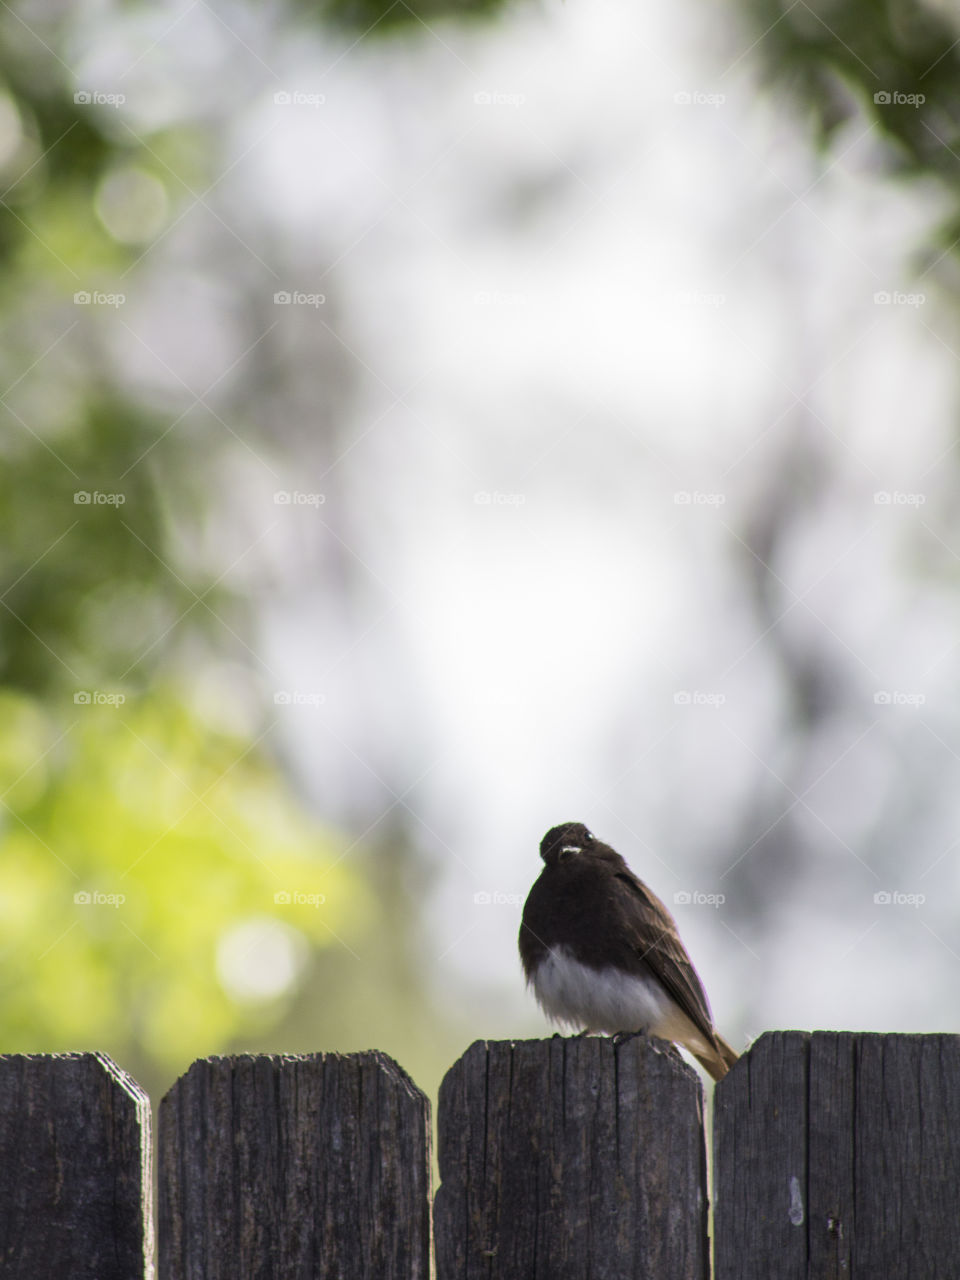 Black Phoebe sitting on a fence in a Northern California backyard